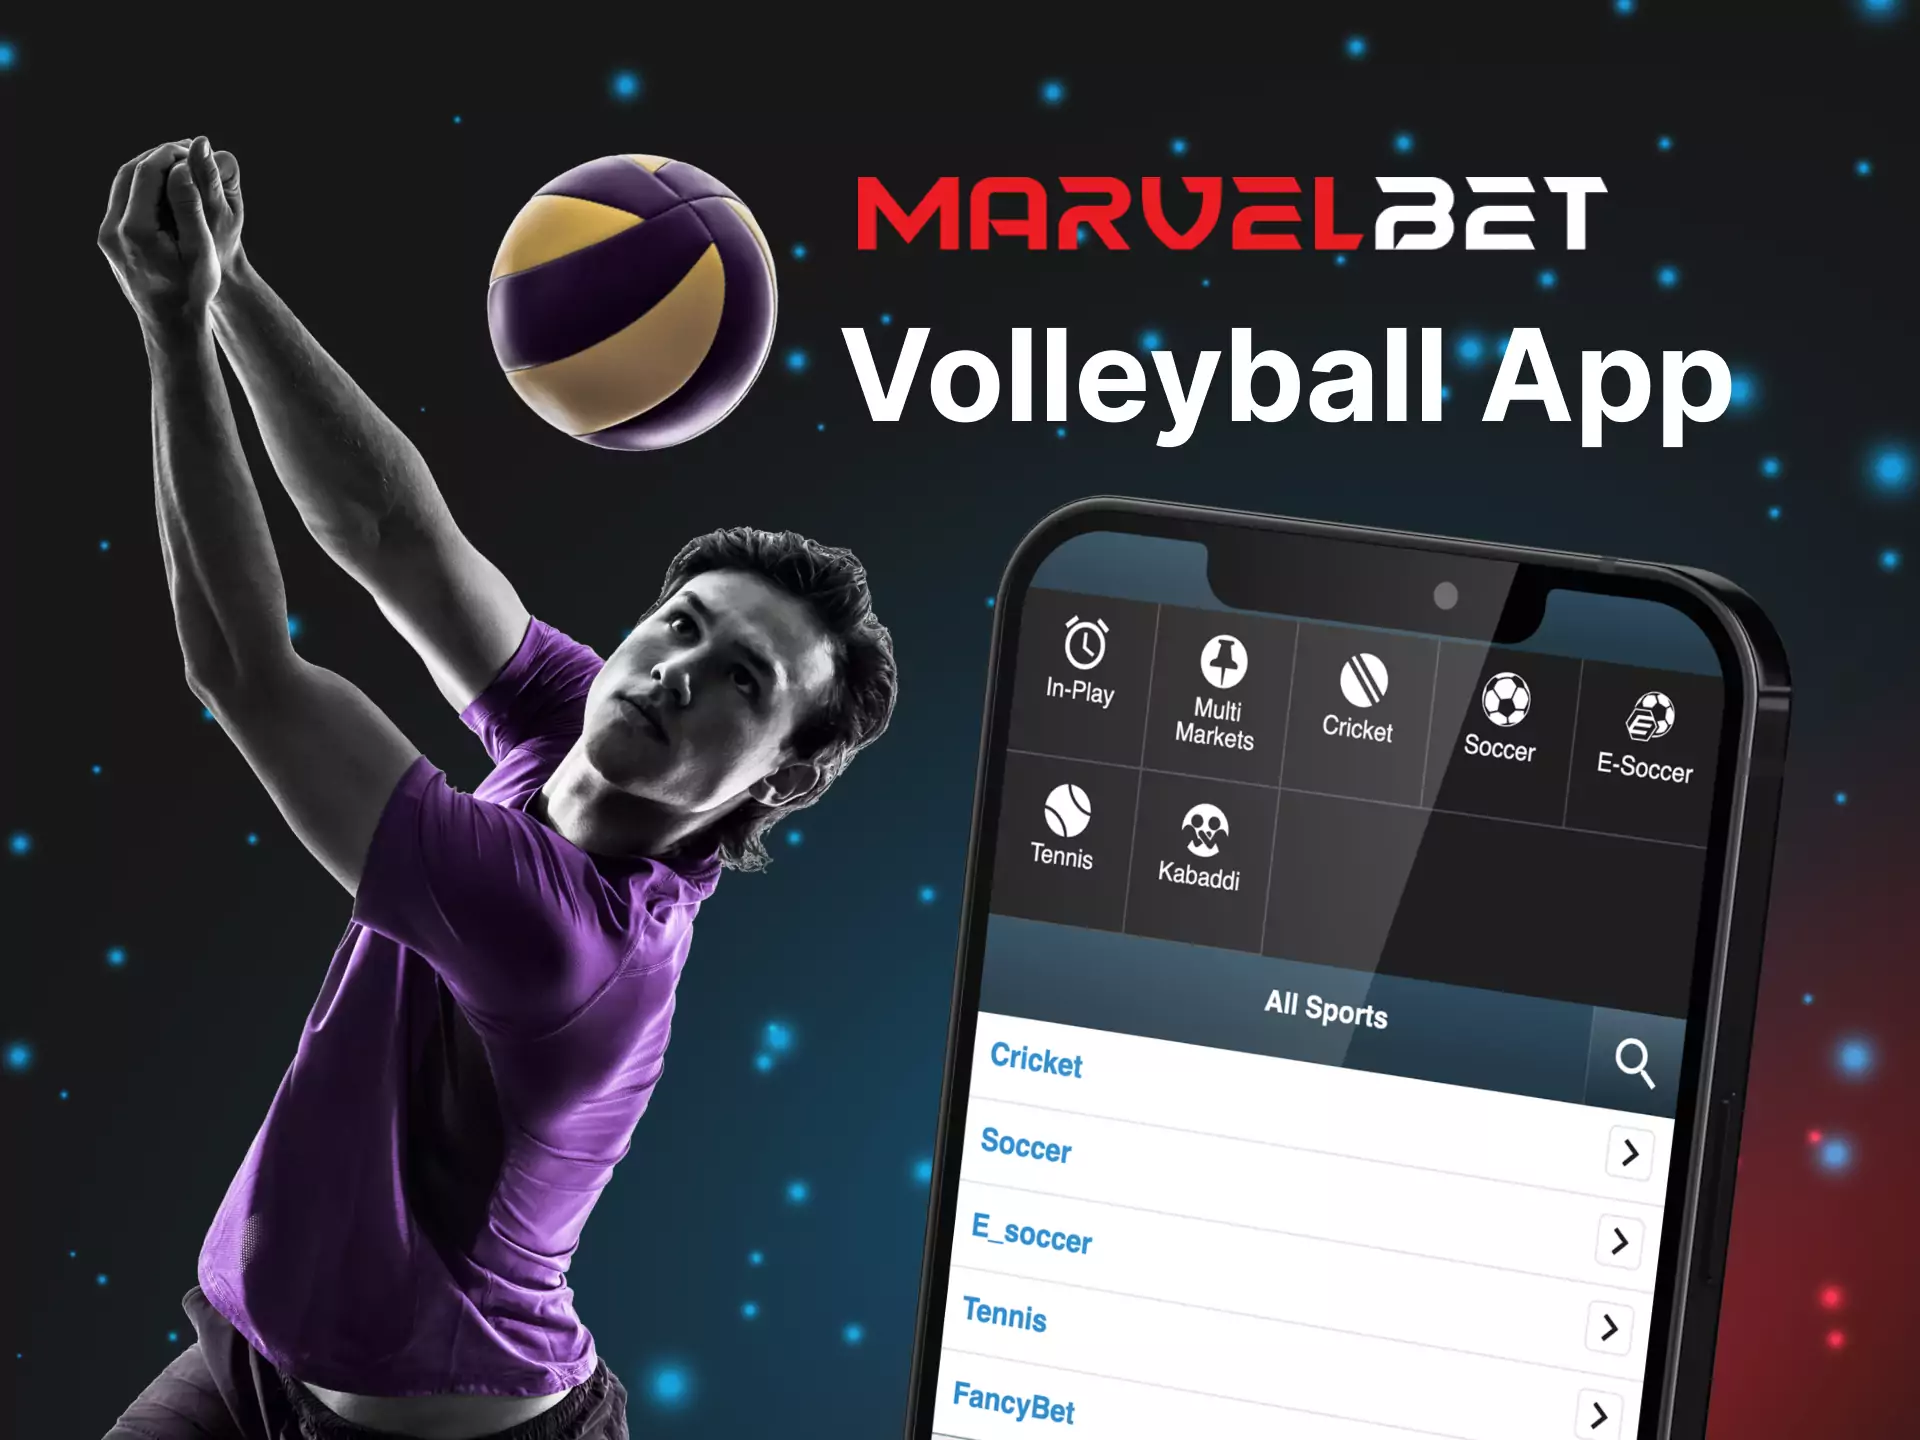 You can place a bet on volleyball in the Marvelbet app.